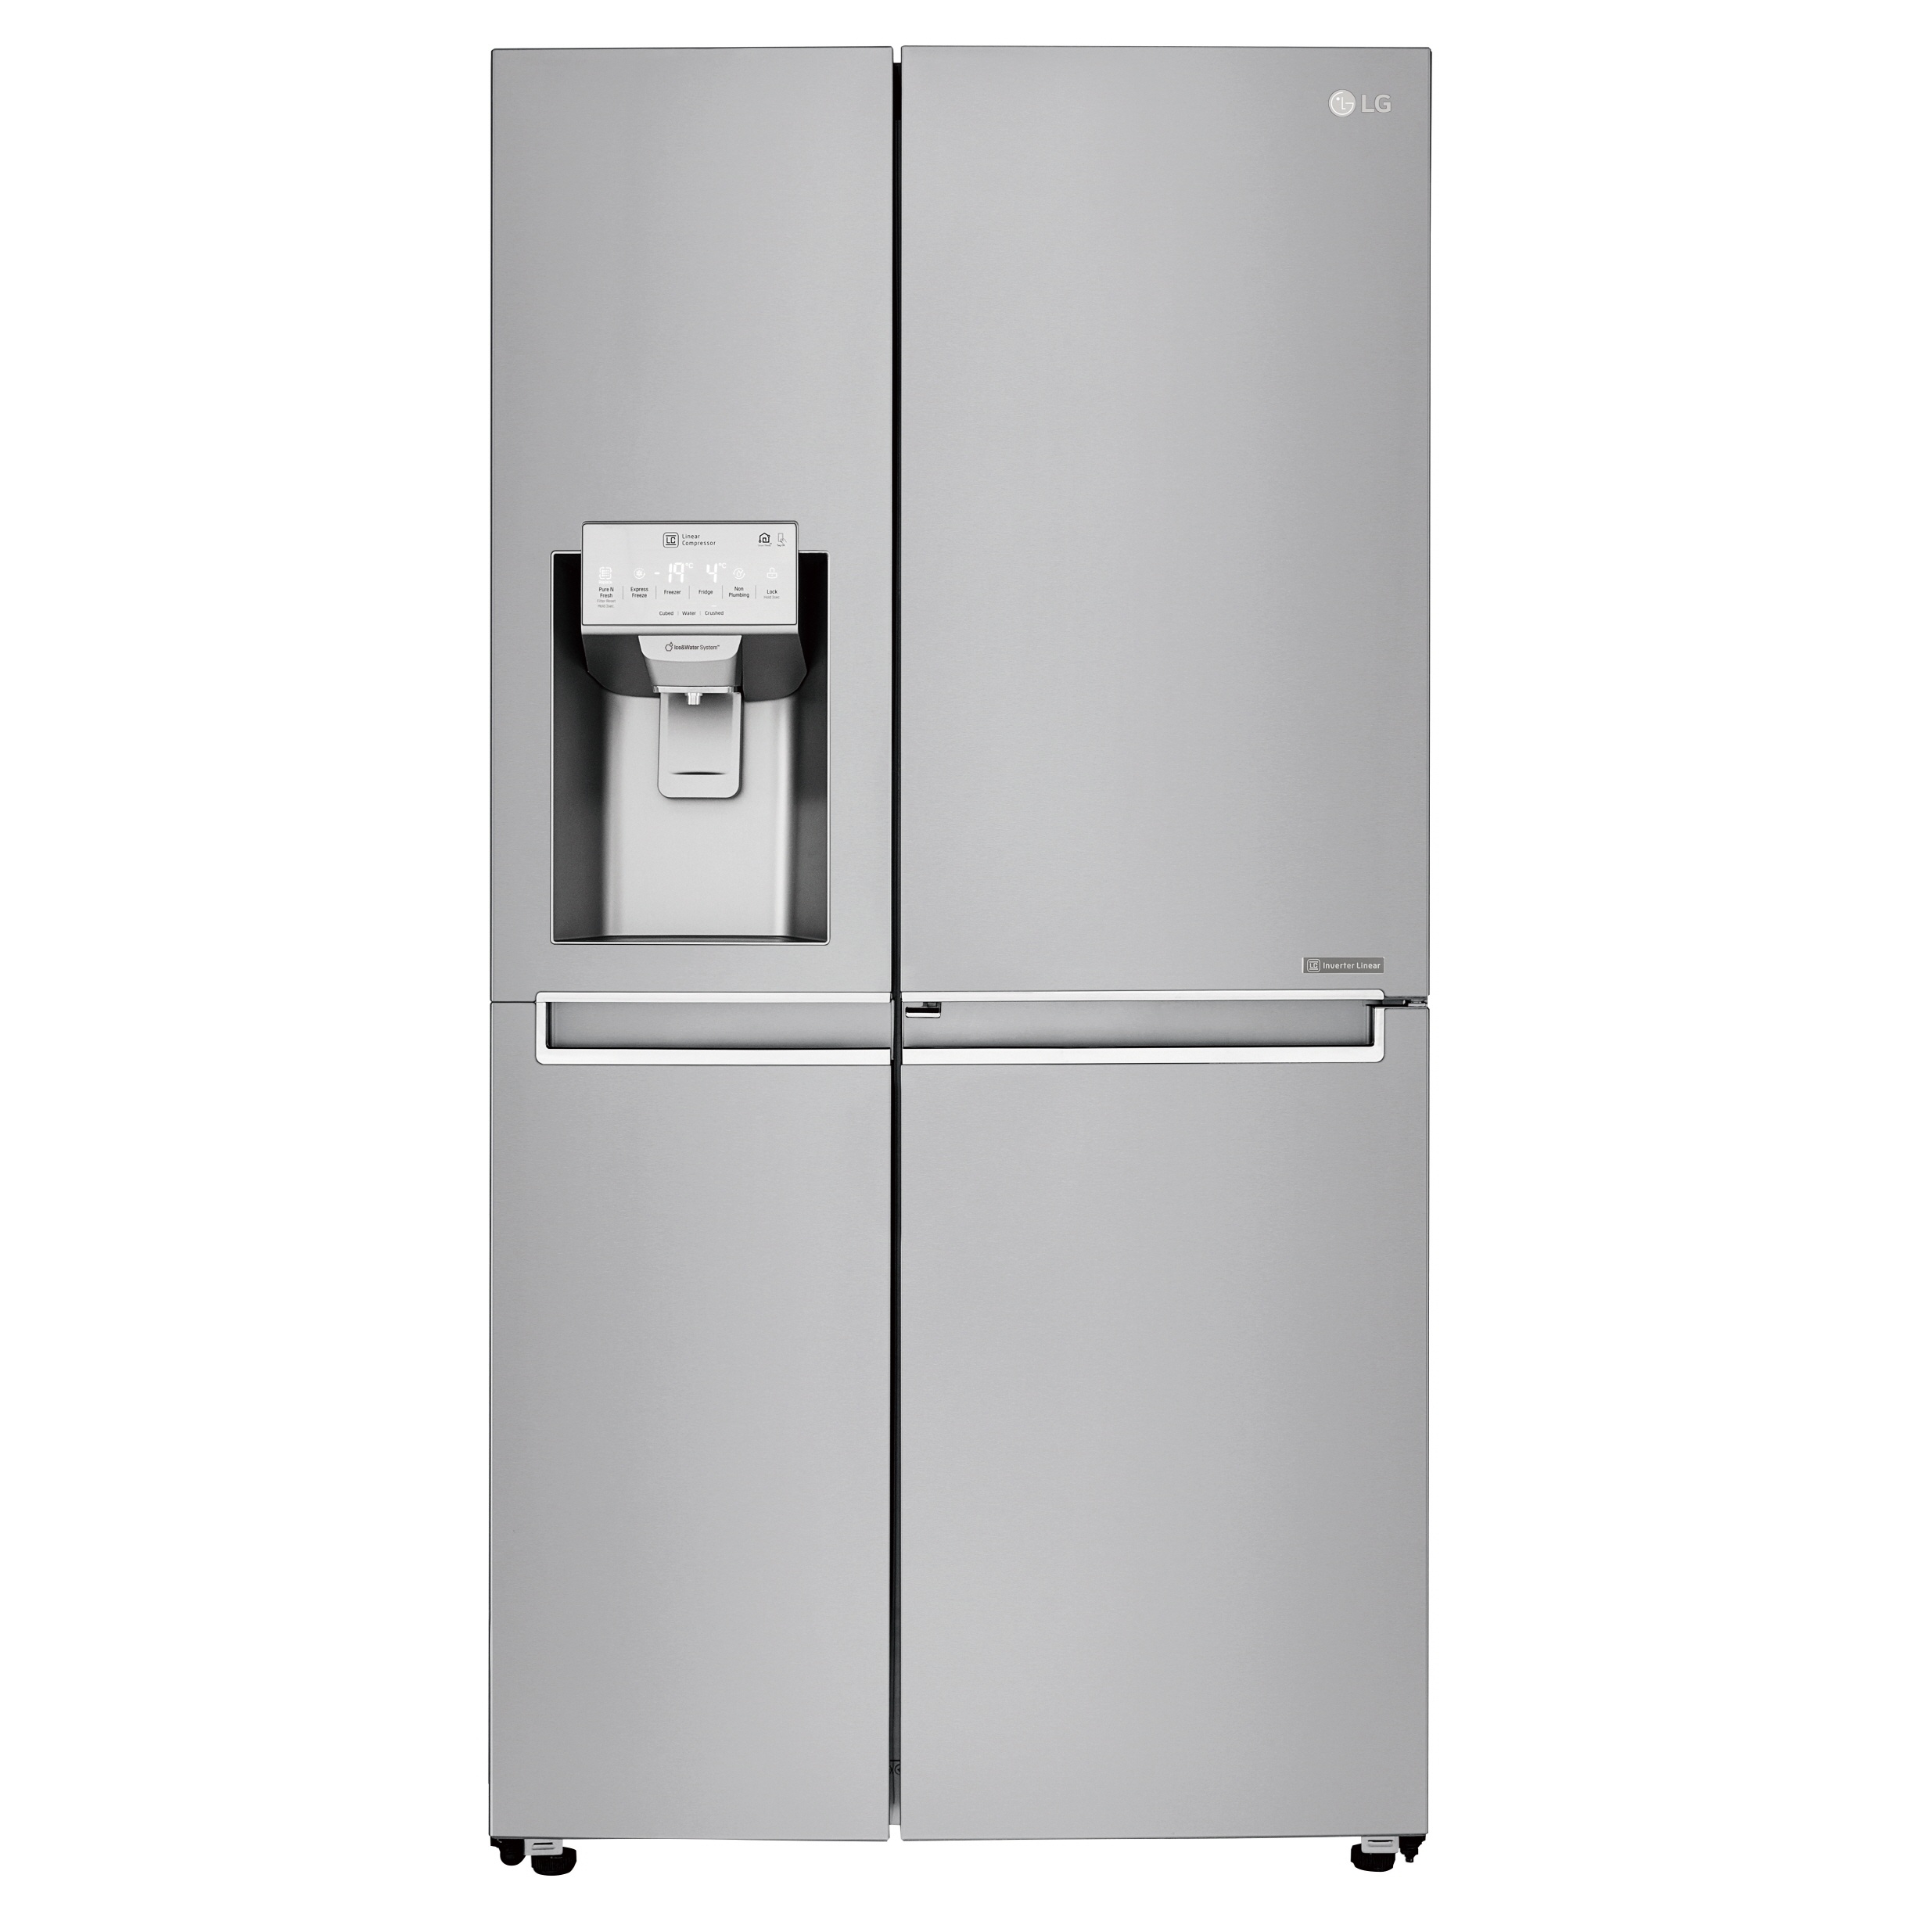 The front shot of LG's side-by-side refrigerator